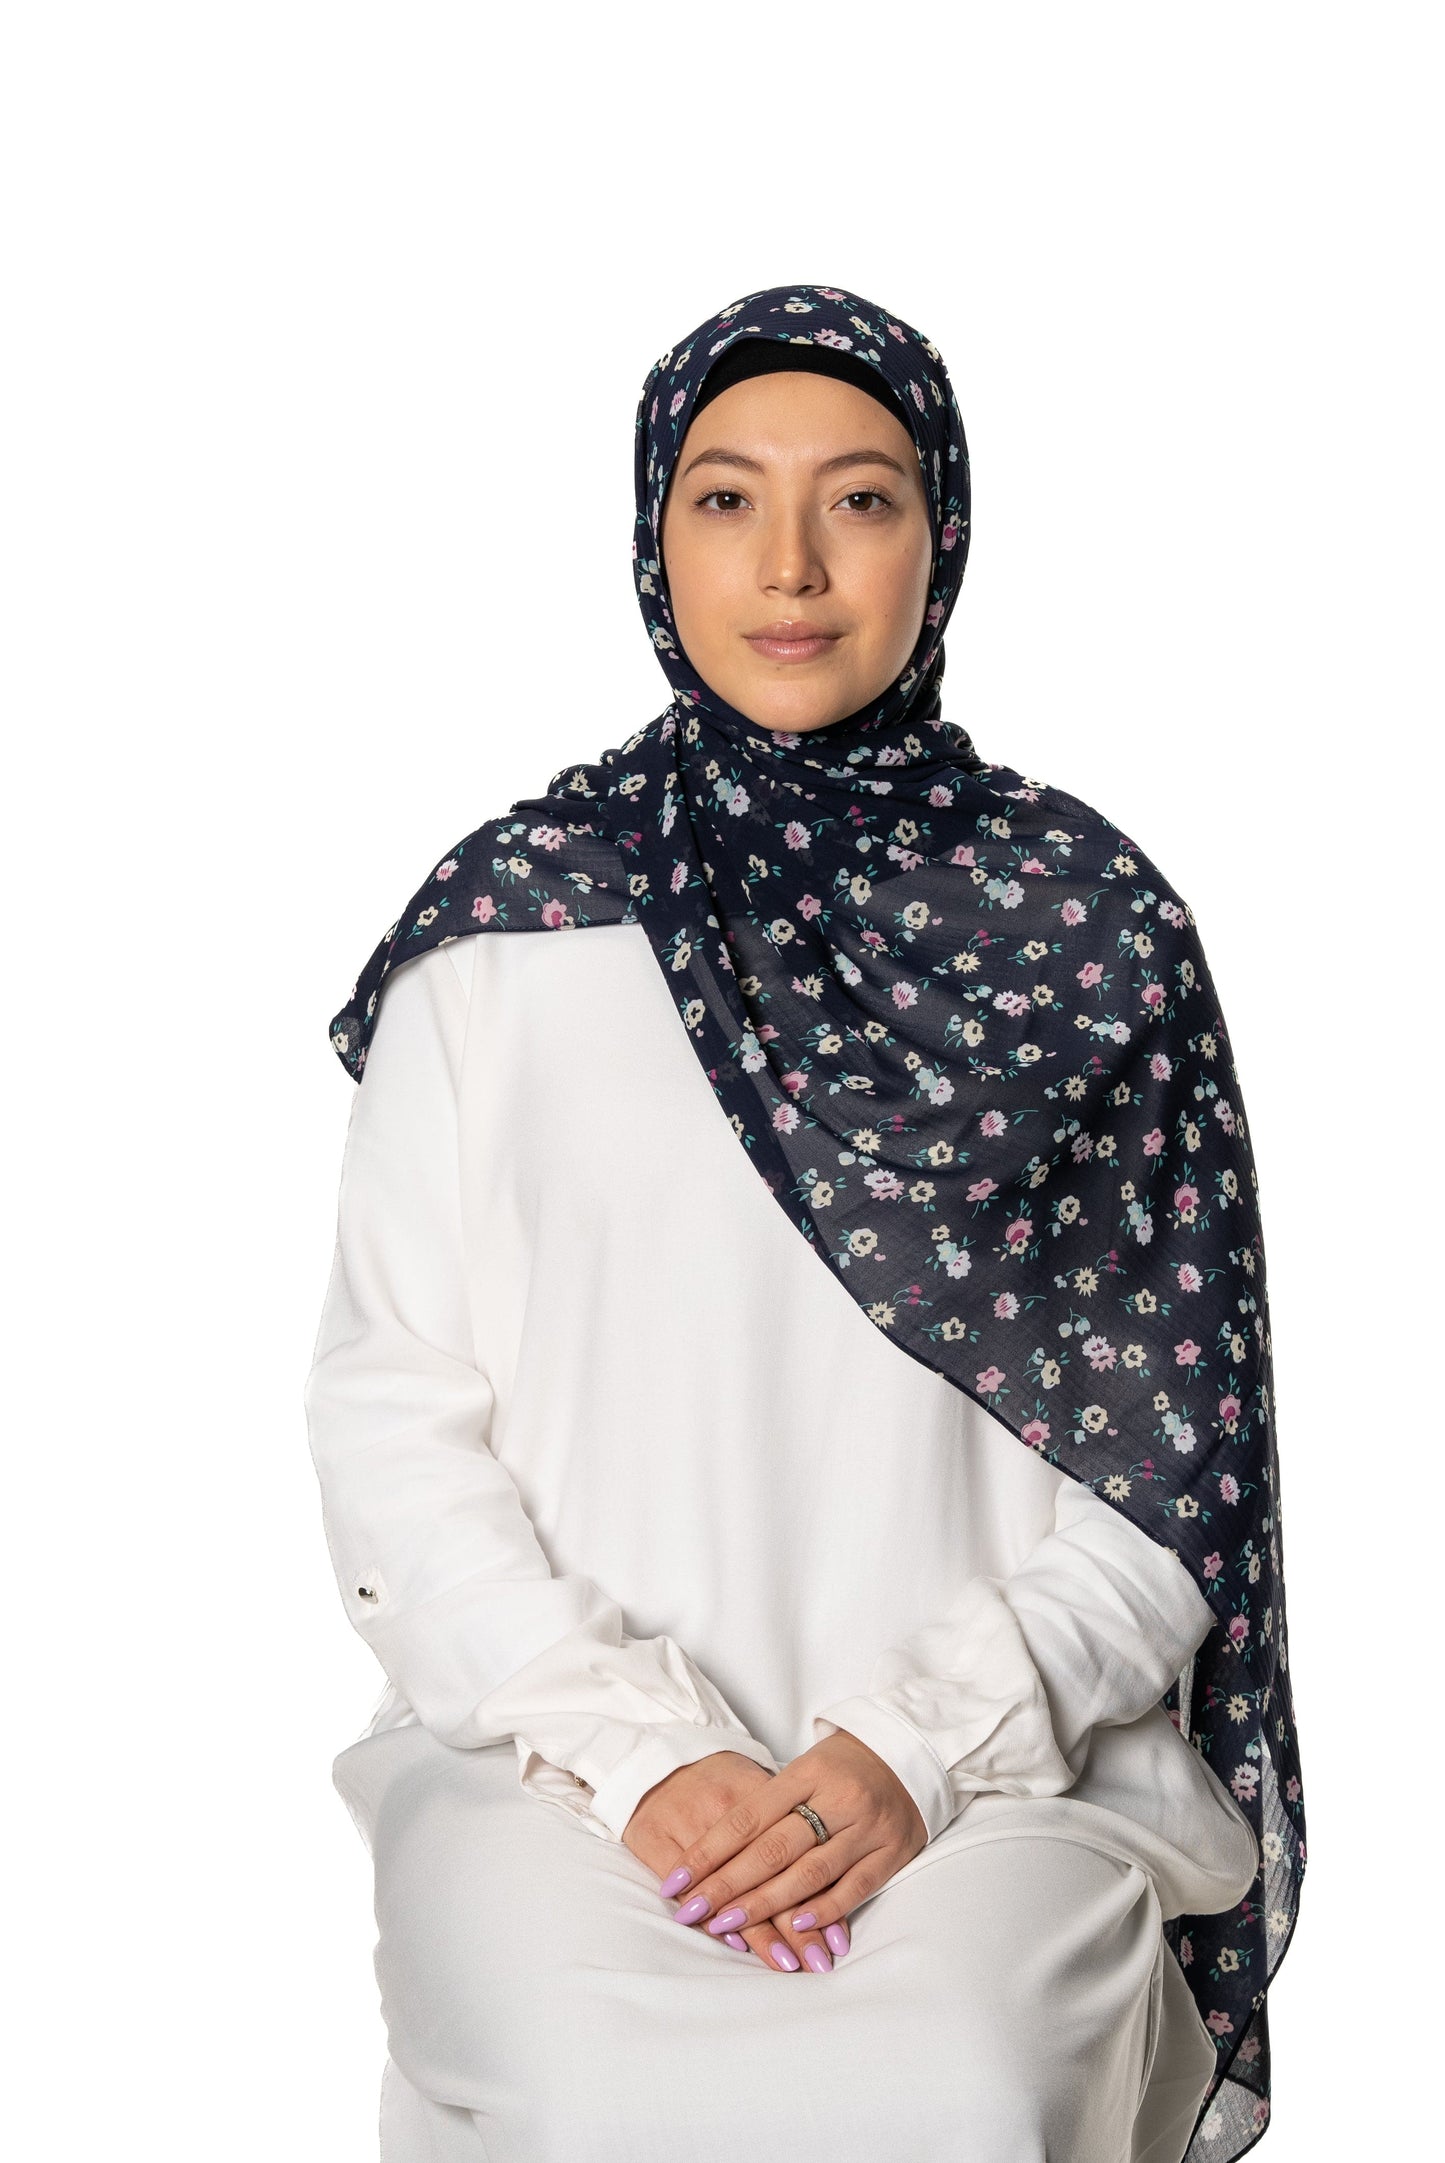 Jolie Nisa Hijab Infinity Navy Experience Luxury and Comfort with Jolie Nisa Premium Crinkle Chiffon Hijab - Non-Slip, Elegant and Breathable Hijab for Women